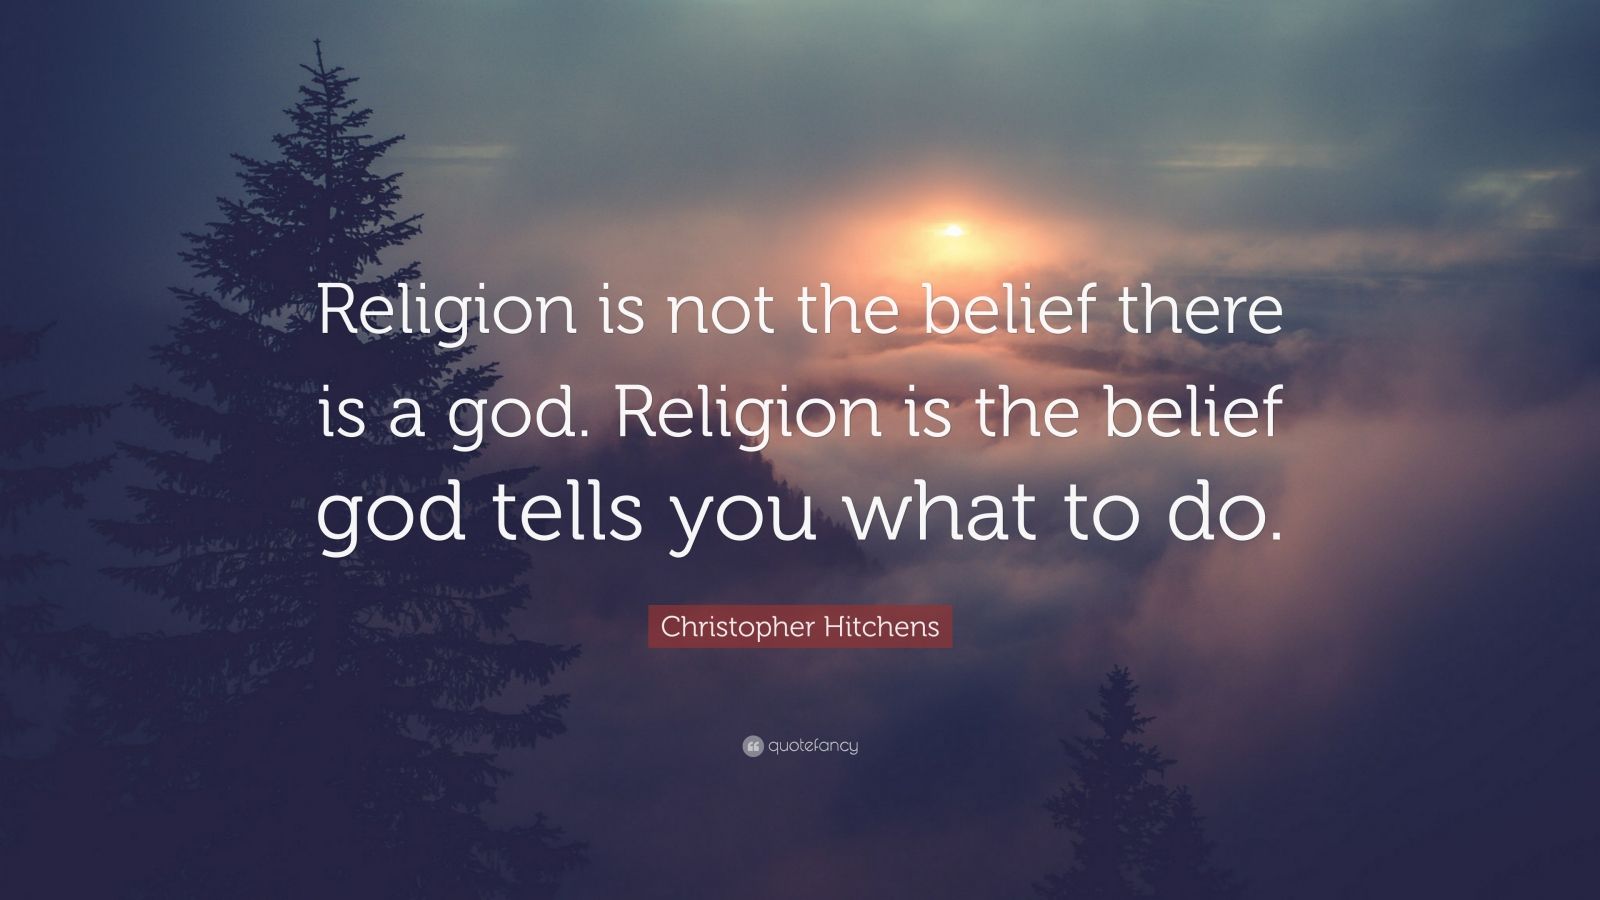 Christopher Hitchens Quote “religion Is Not The Belief There Is A God